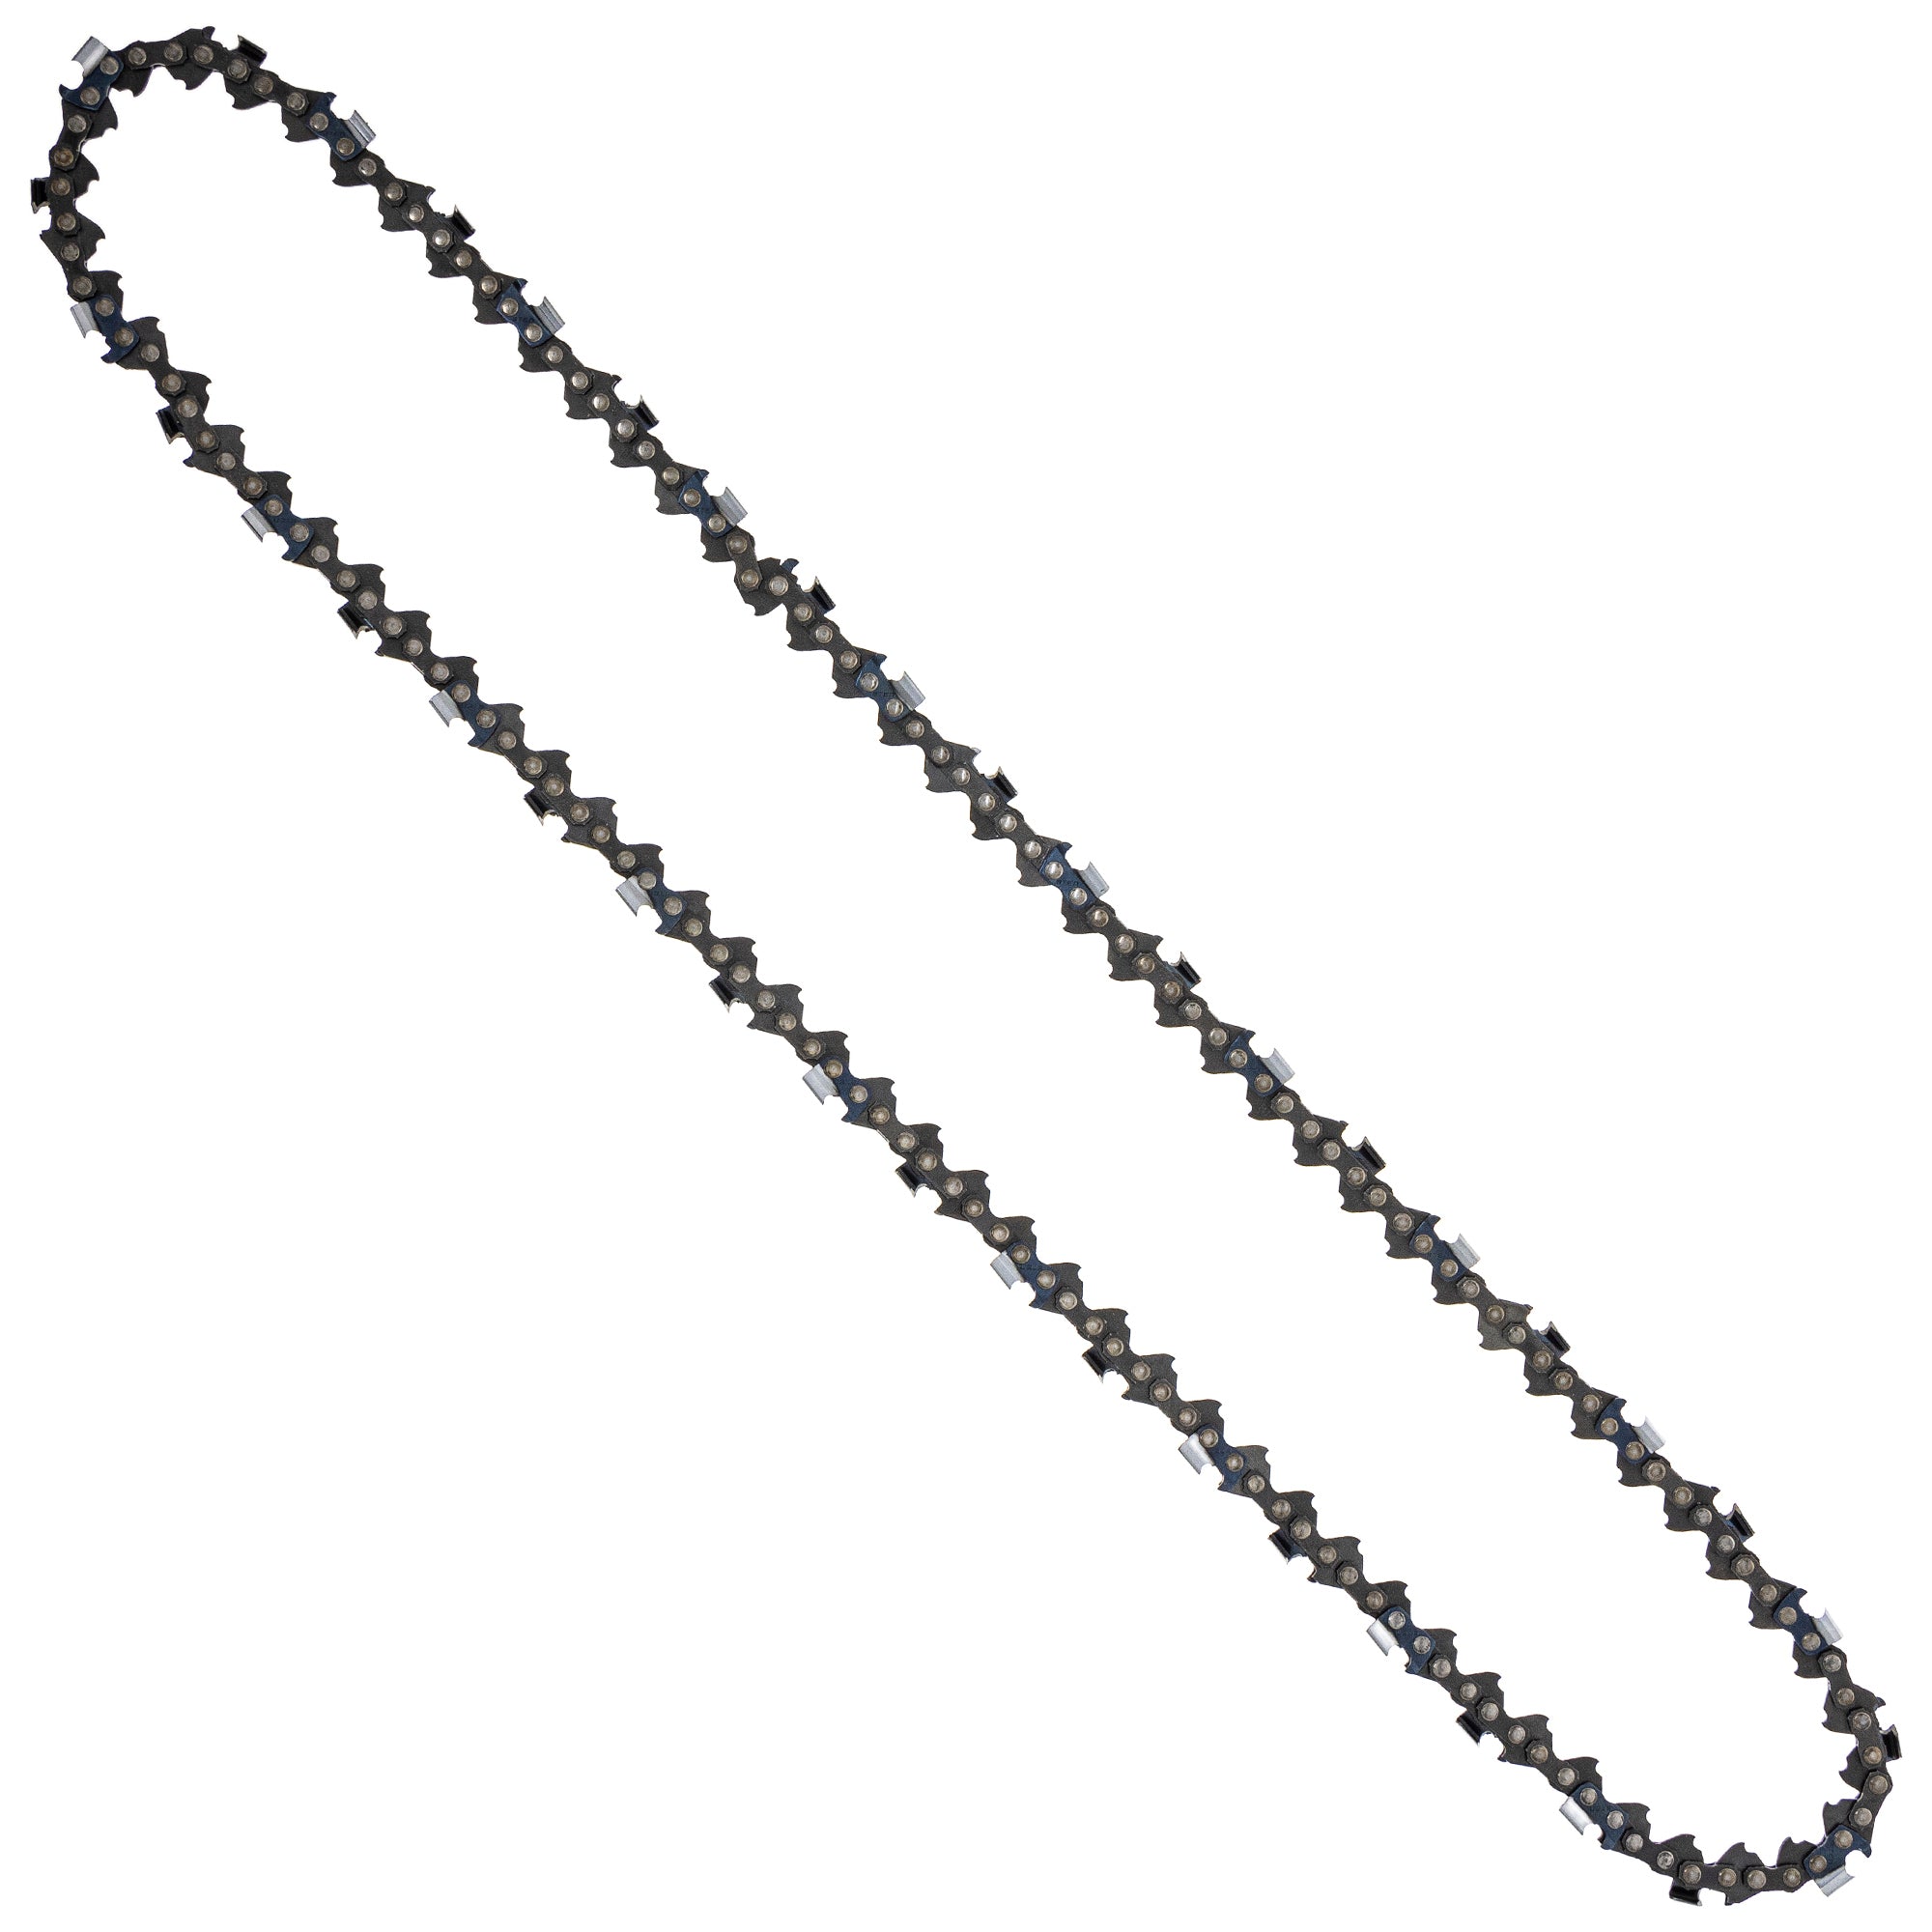 8TEN 810-CCC2268H Chain 2-Pack for zOTHER Oregon EA5600F 555 550 545